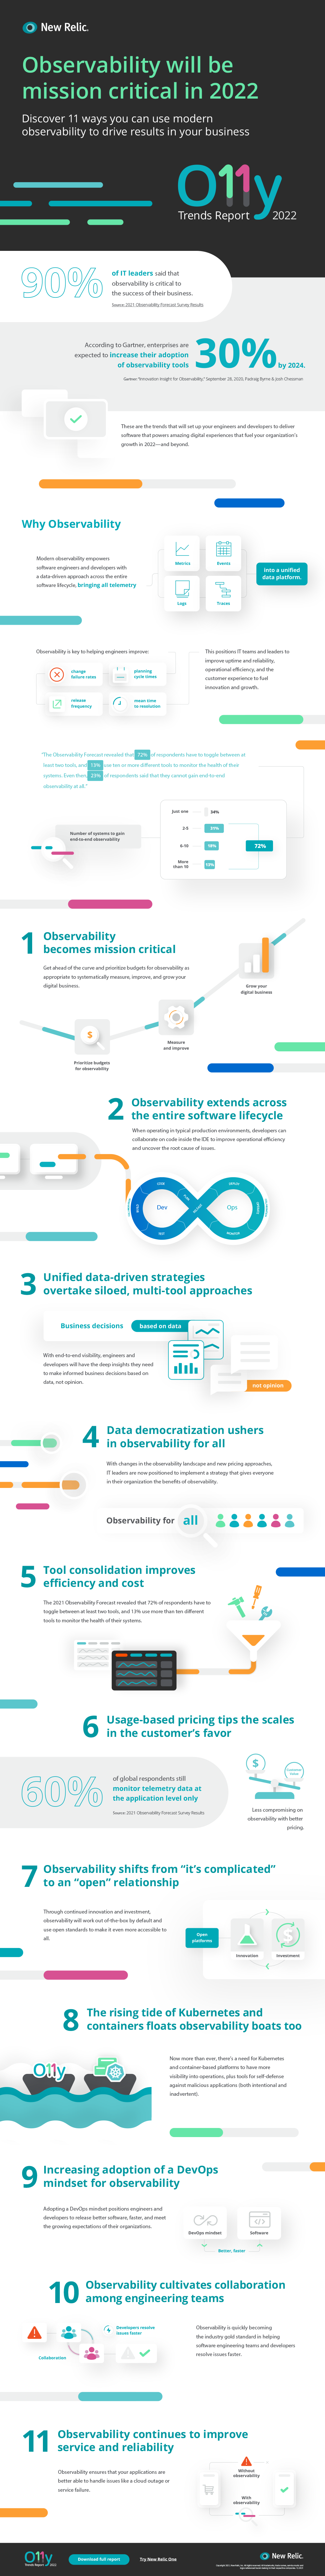 New Relic O11y Trends 2022 Infographic 